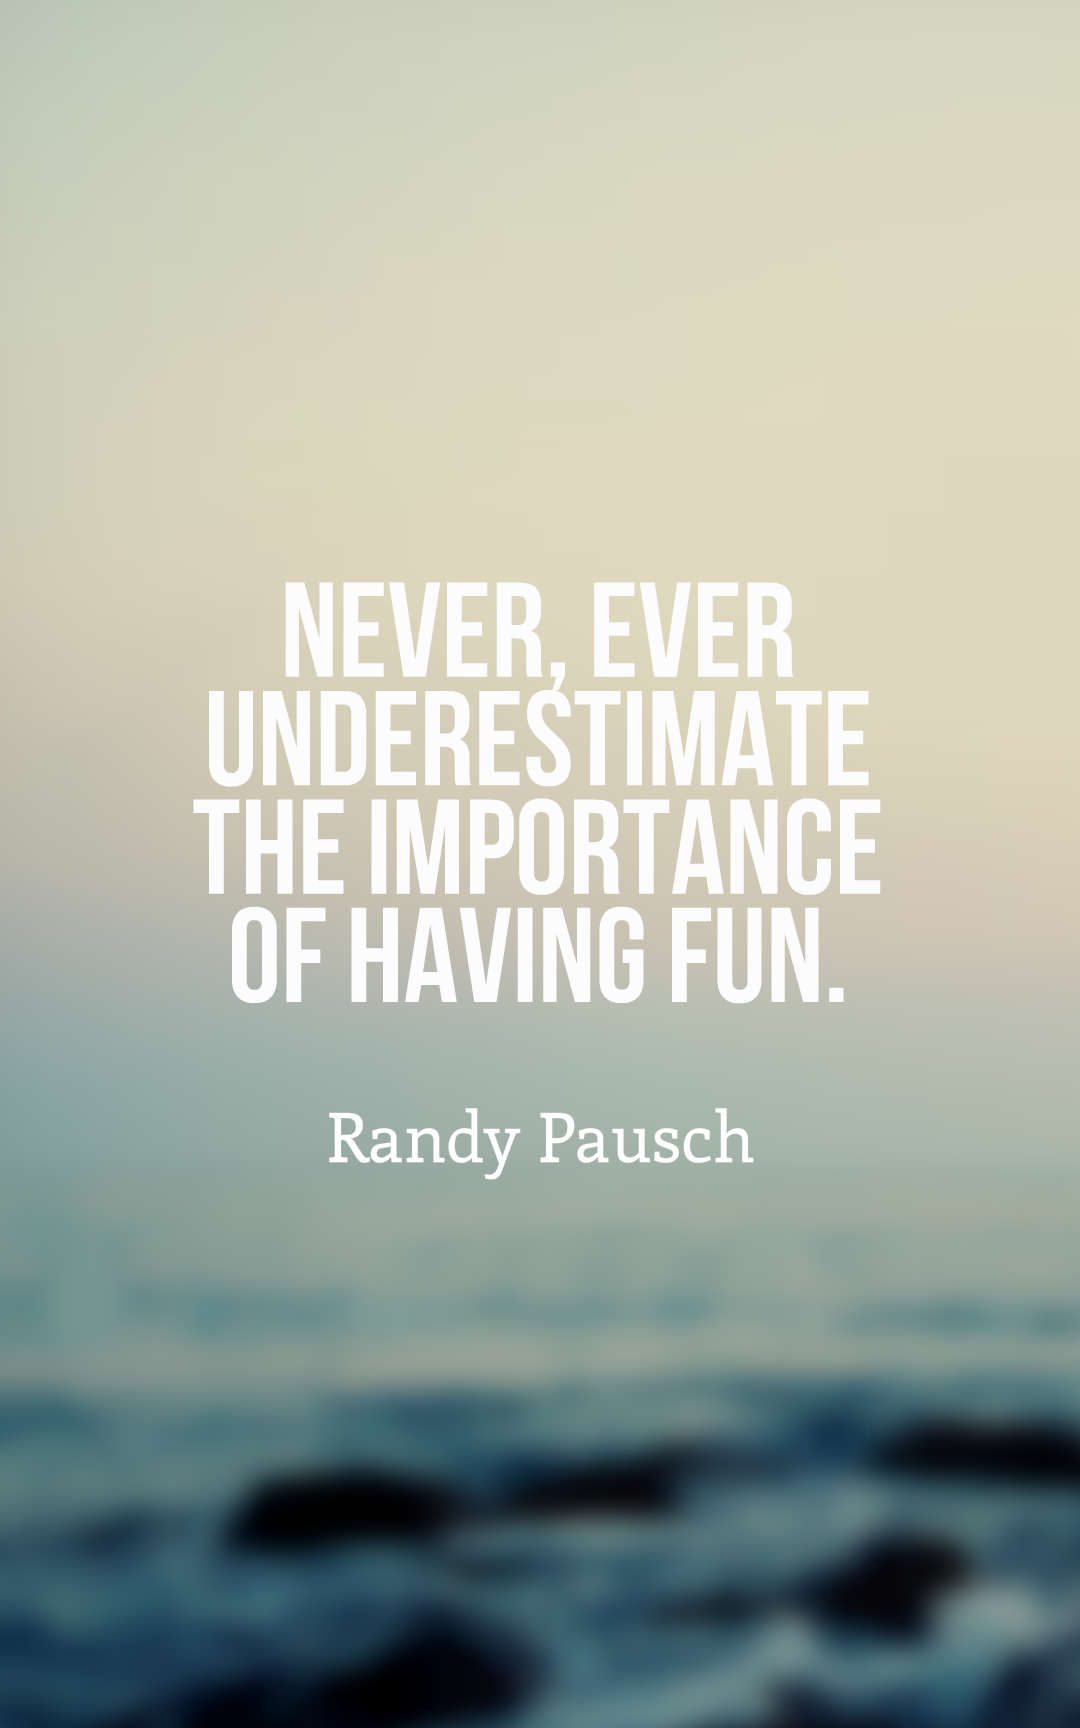 Never ever underestimate the importance of having fun.